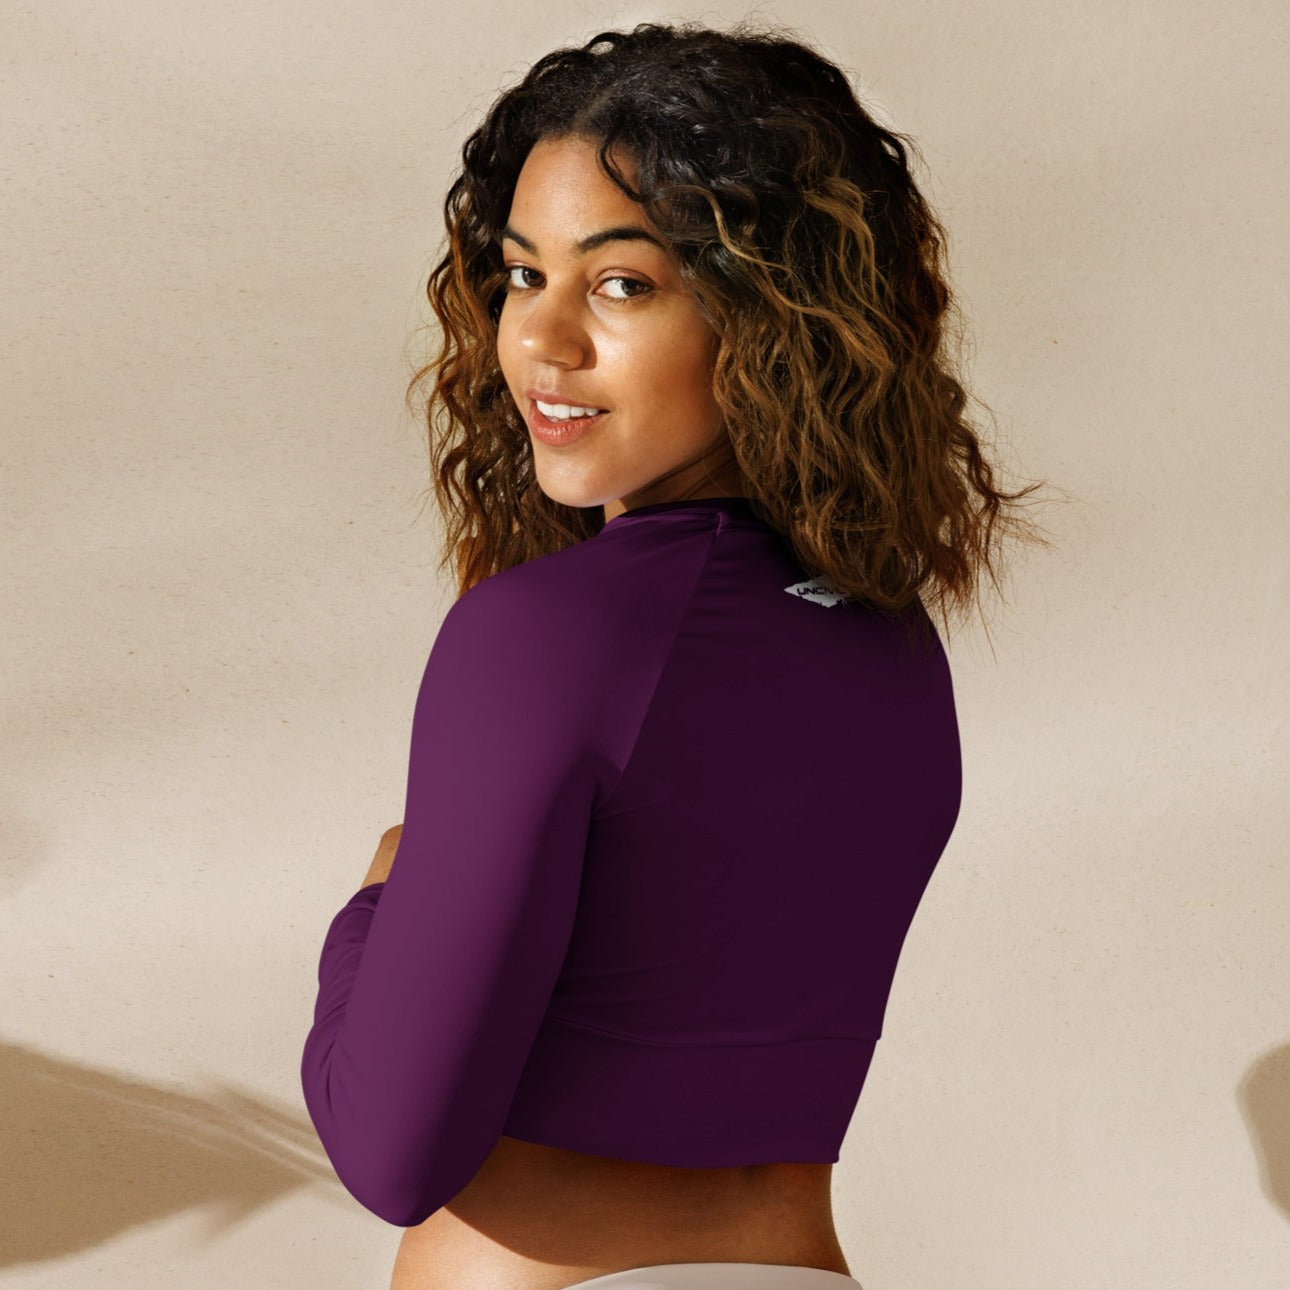 Dark Fuchsia long-sleeve crop top for women is made of recycled polyester and elastane, making it an eco-friendly choice for swimming, sports, or athleisure. UPF 50+.